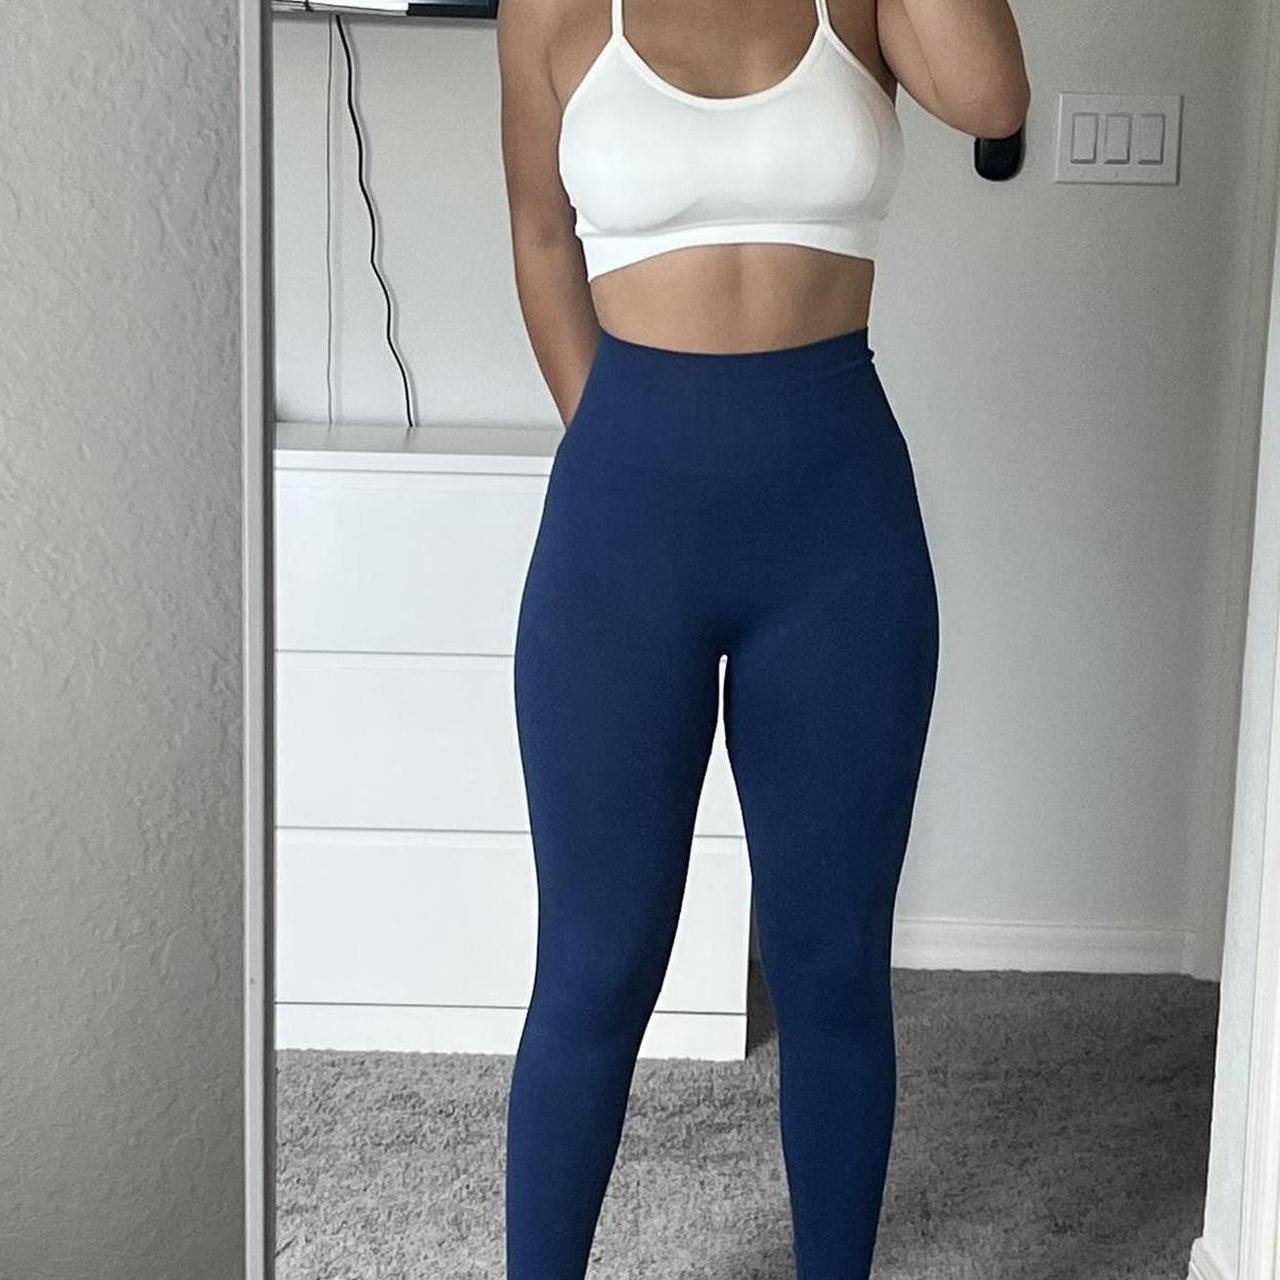 2 SHEIN WORKOUT LEGGINGS FOR ONE PRICE Solid - Depop